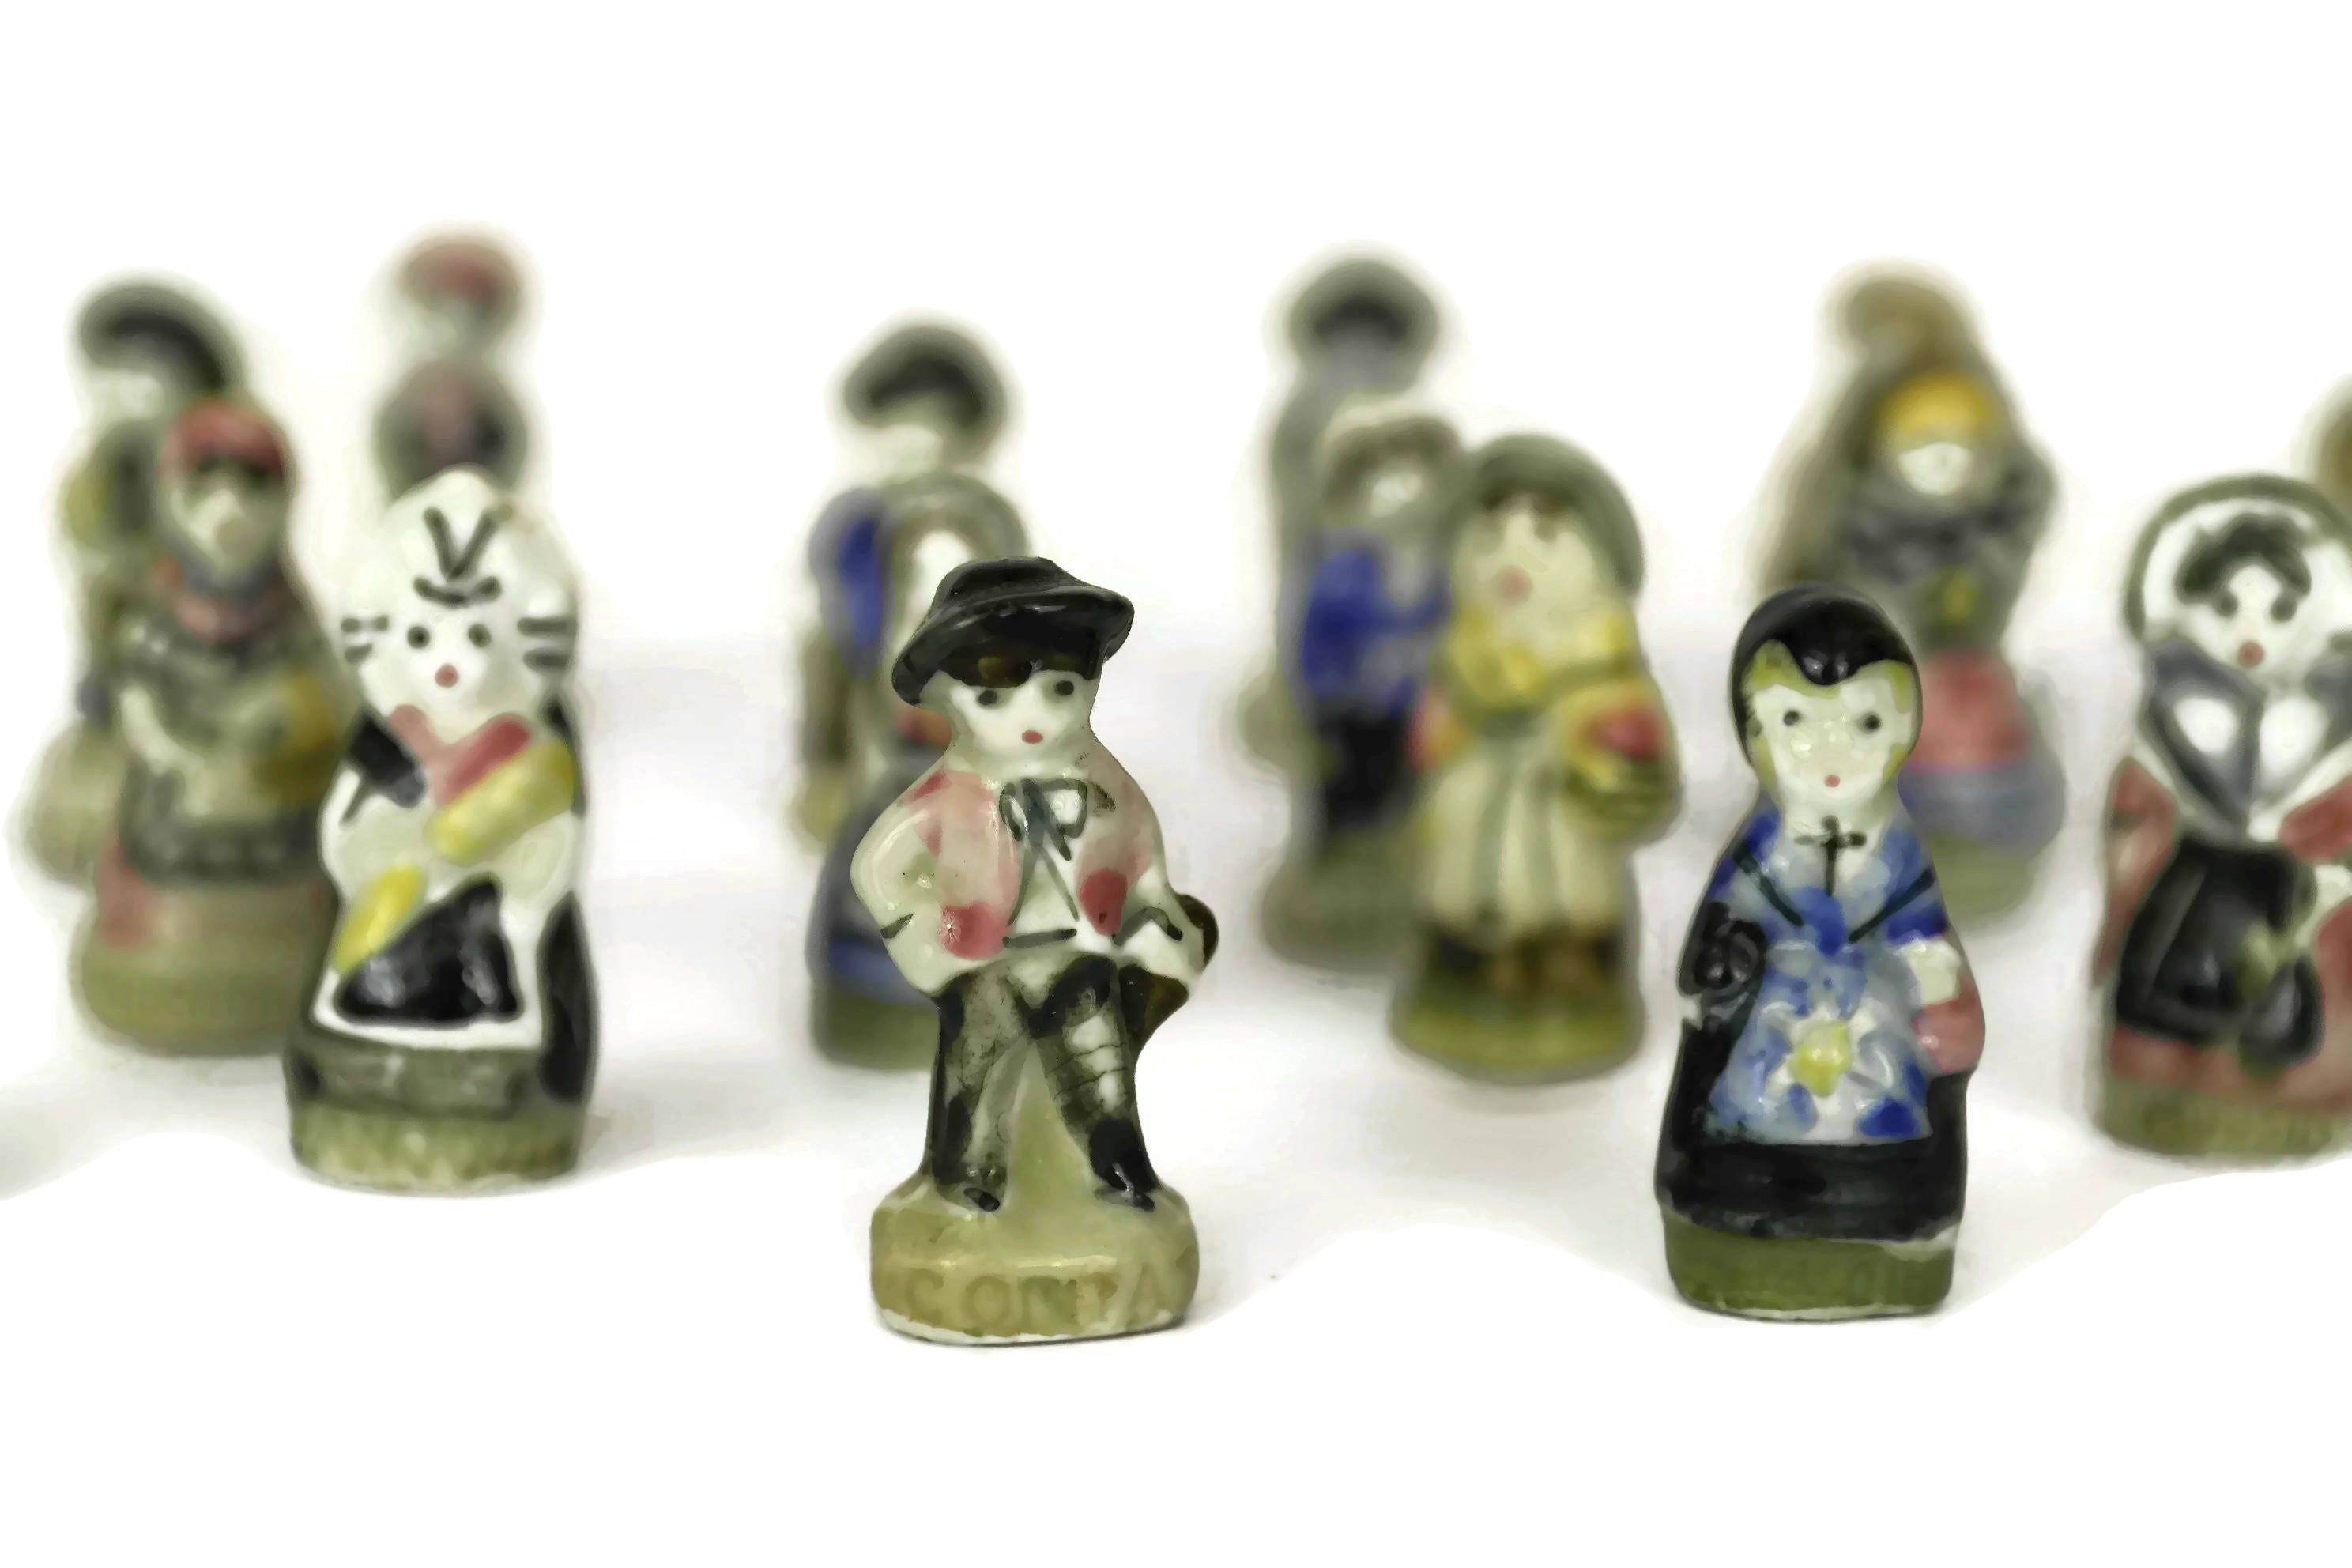 Miniature Porcelain Doll Figurines. Vintage French Feves